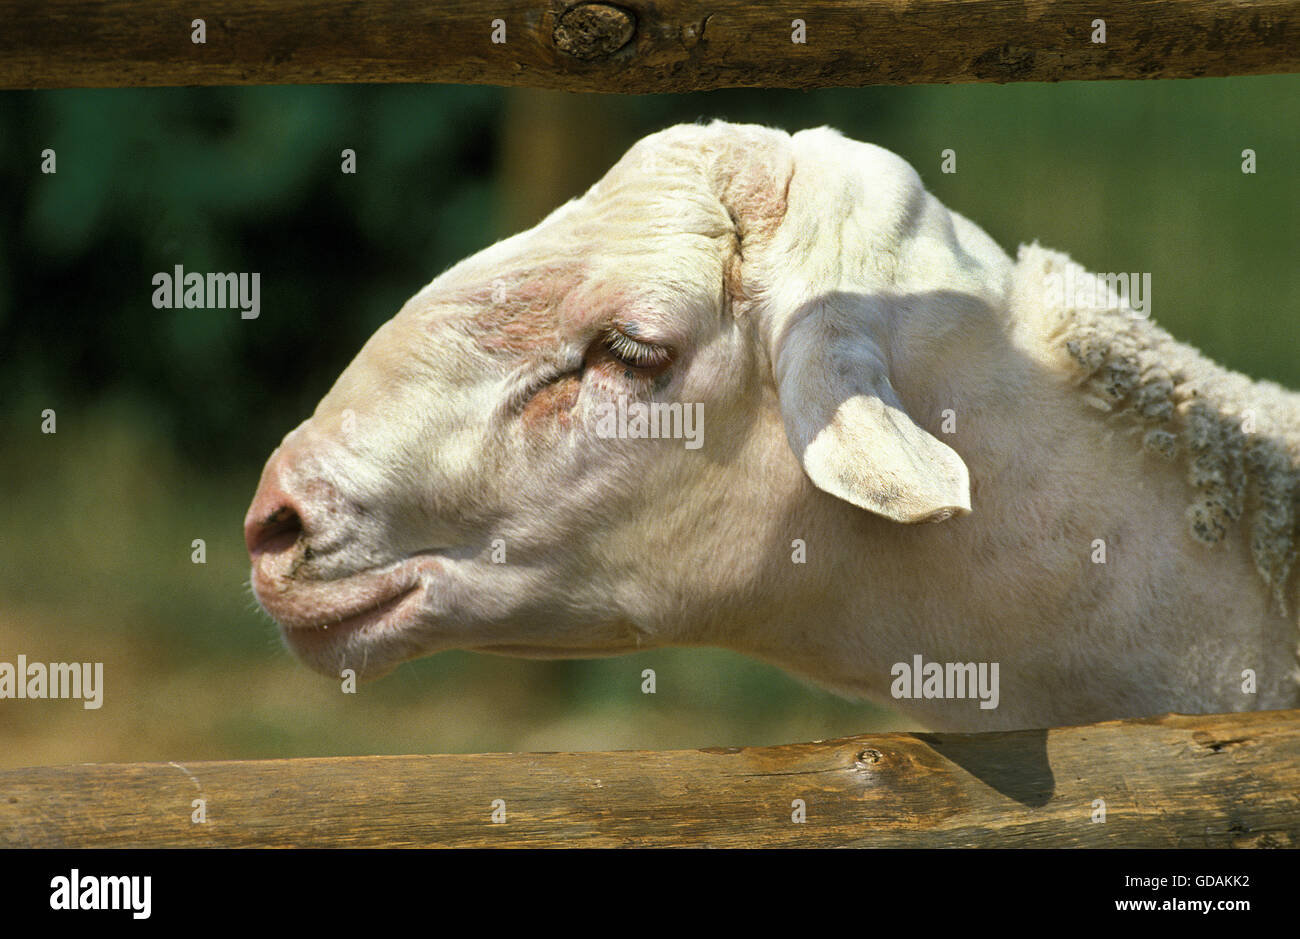 Lacaune Sheep, a French Breed Produicing Milk for Roquefort Cheese, Portrait of Ewe Stock Photo